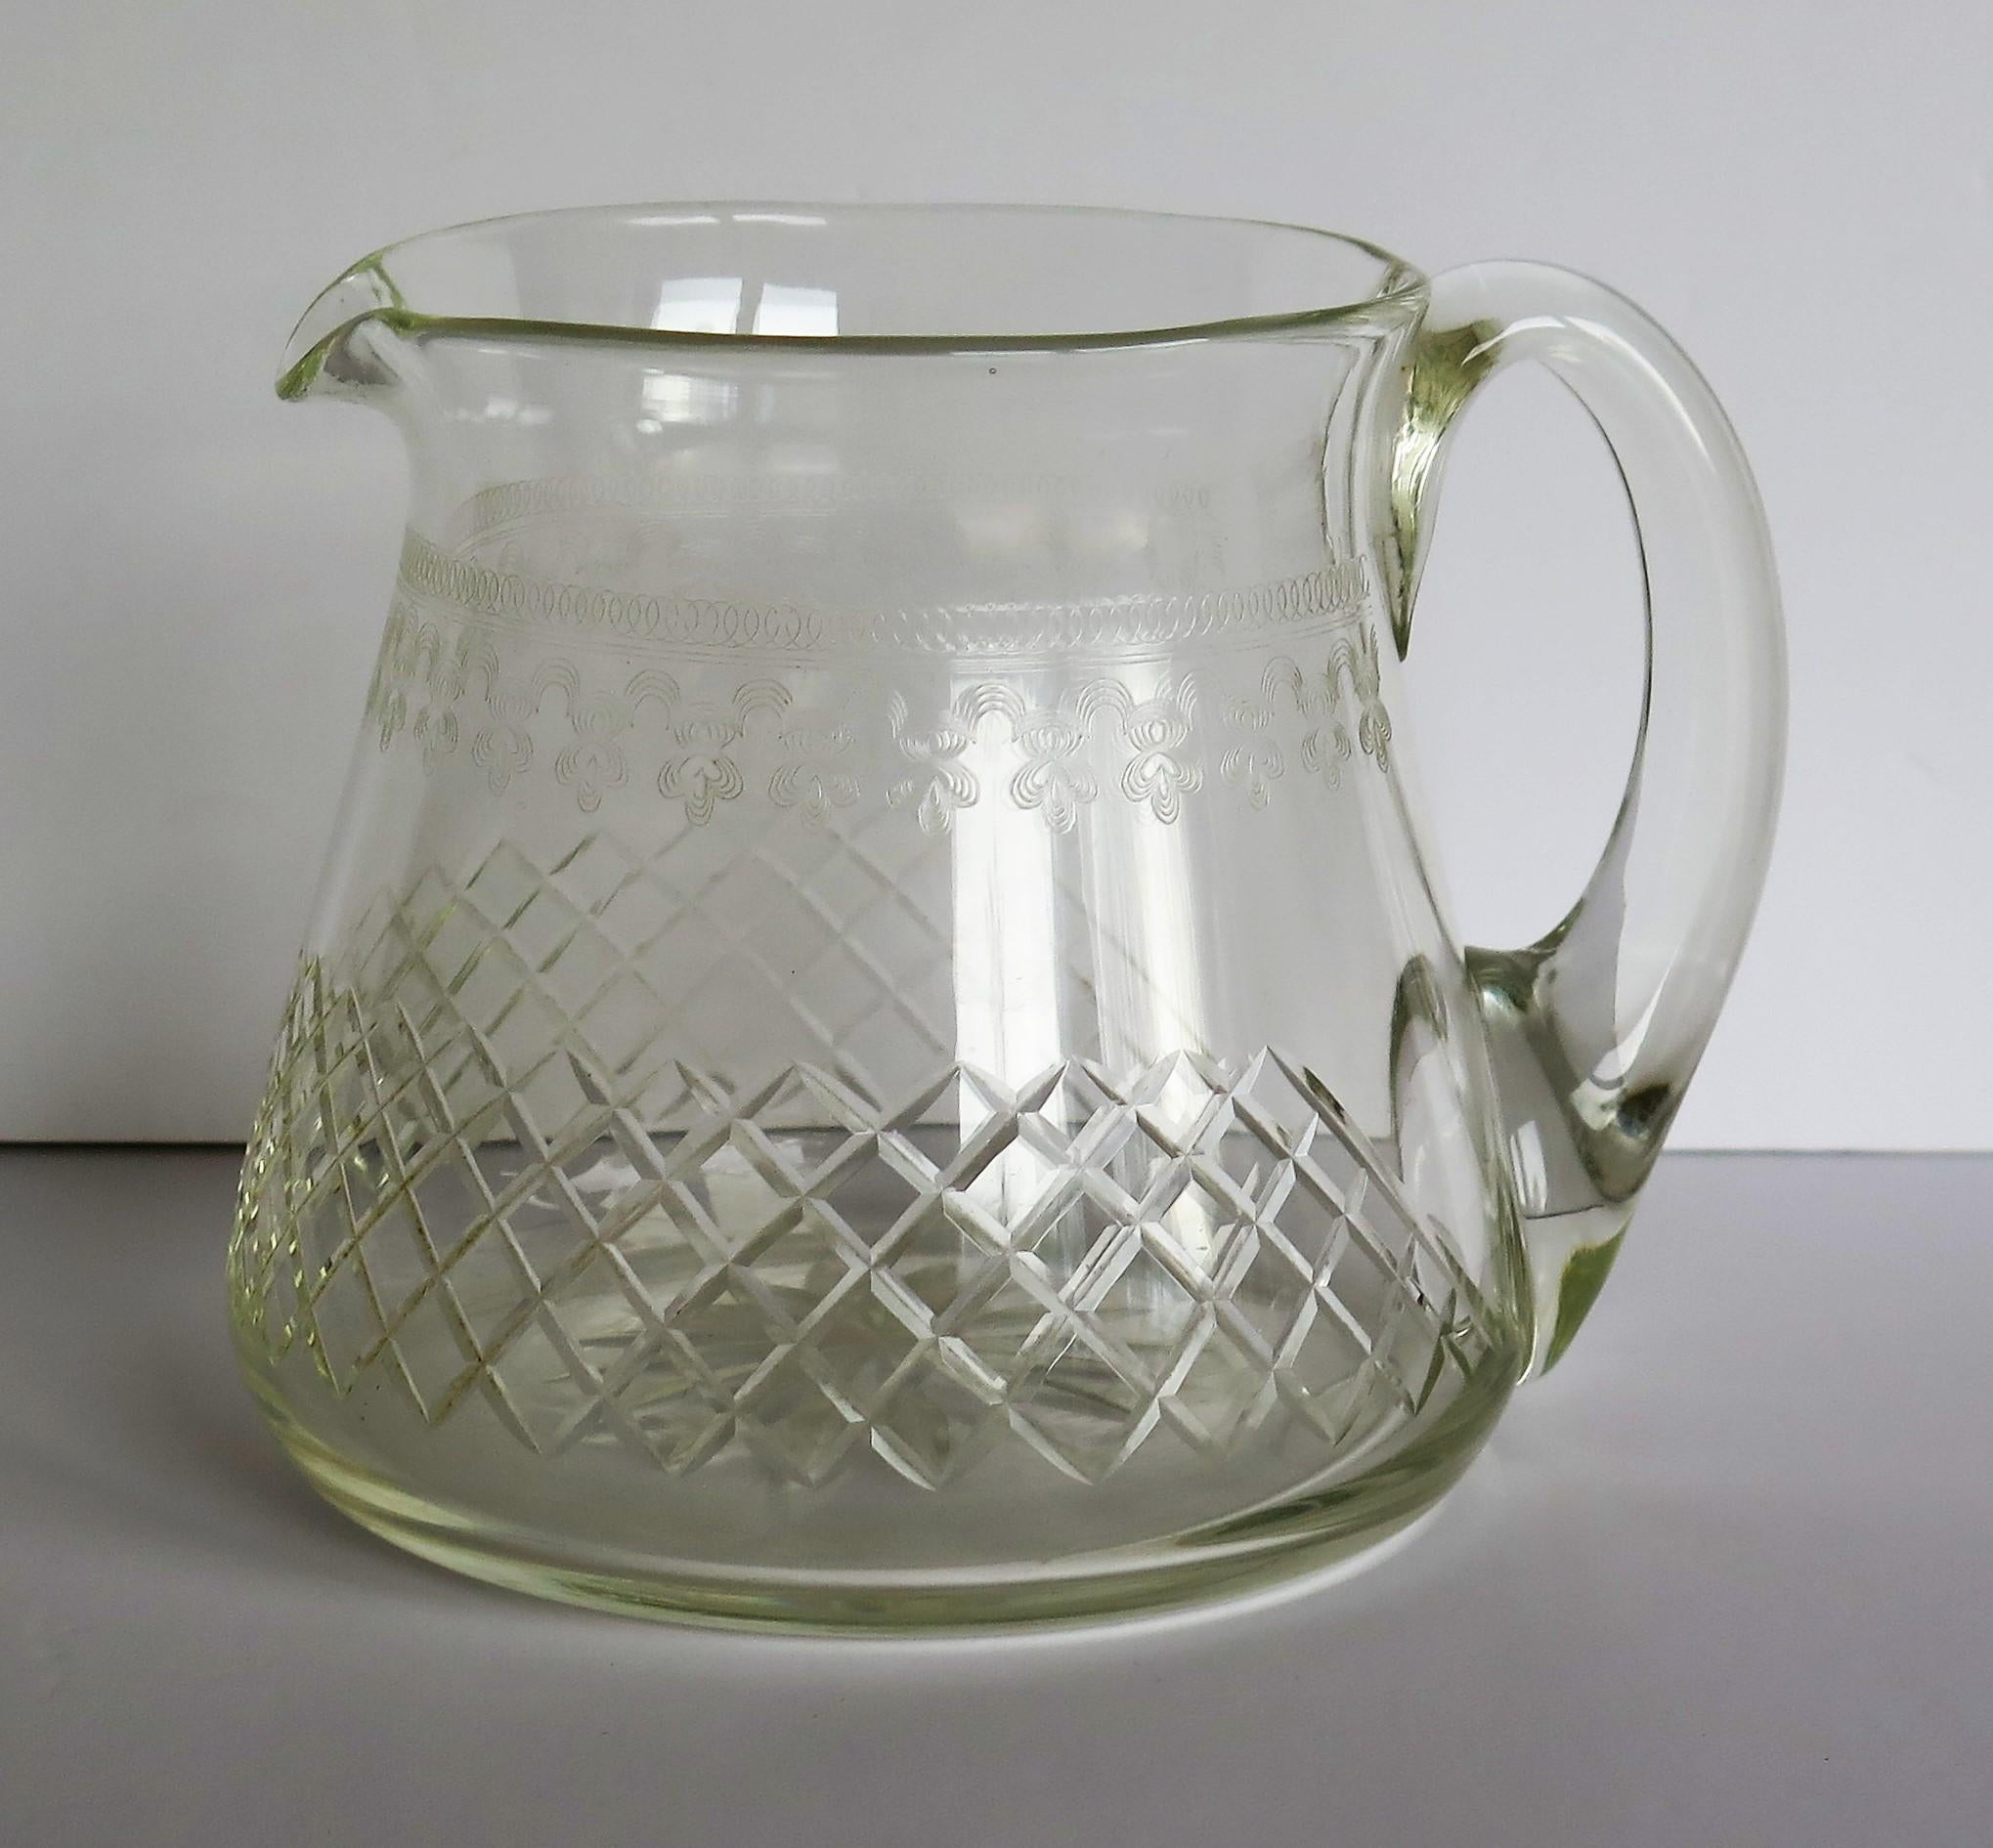 This is a good quality crystal lead glass, Water jug or pitcher which we date to the Edwardian period, circa 1900

This jug weighs about 600gm. unpacked and holds 1.5 pints. 

The jug or pitcher has a circular tapered shape with a good plain